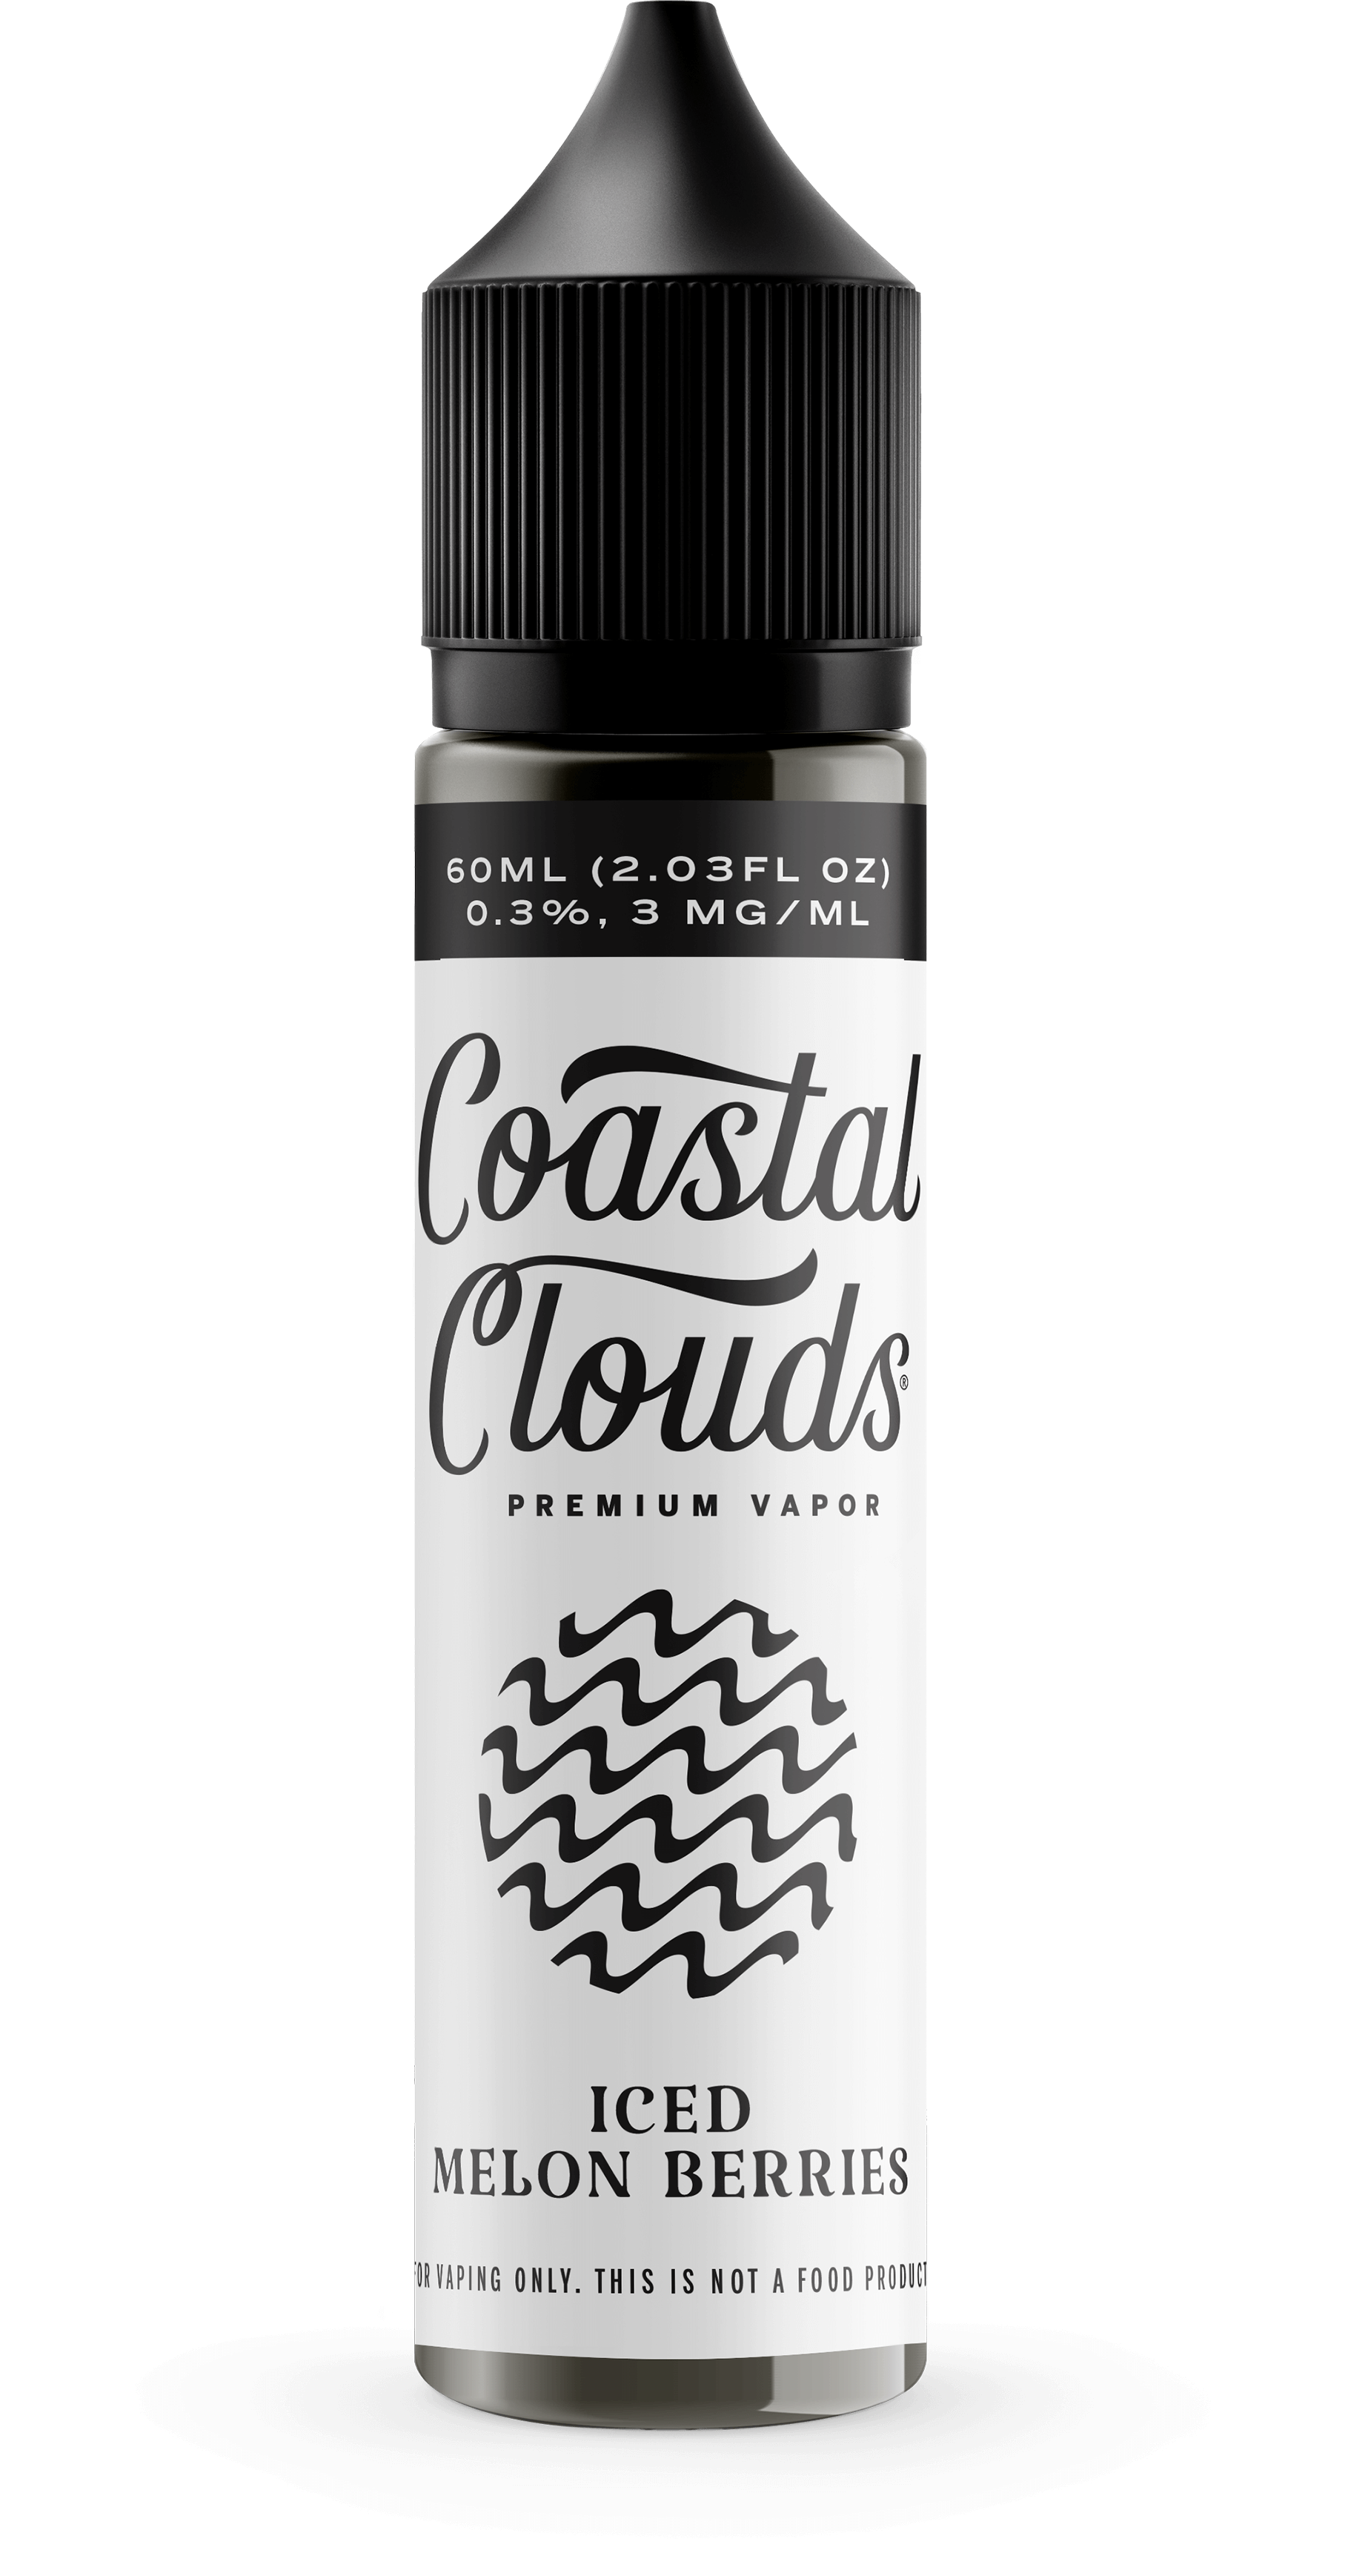 Iced Melon Berries by Coastal Clouds Series 60mL Bottle